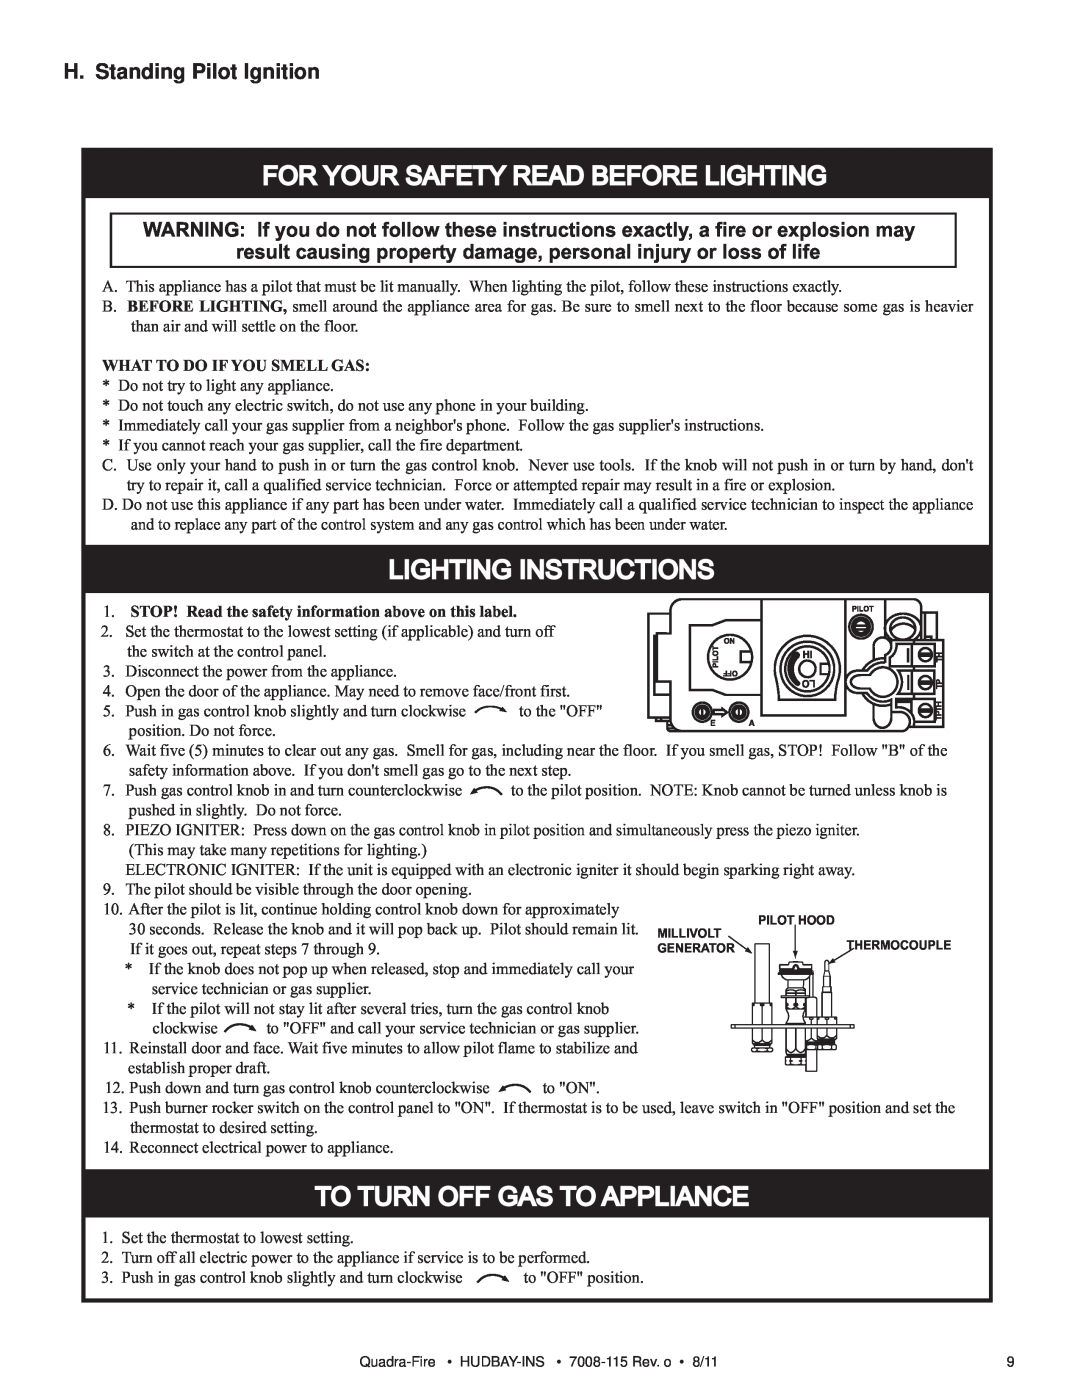 Quadra-Fire 7008-115 owner manual H. Standing Pilot Ignition, For Your Safety Read Before Lighting, Lighting Instructions 